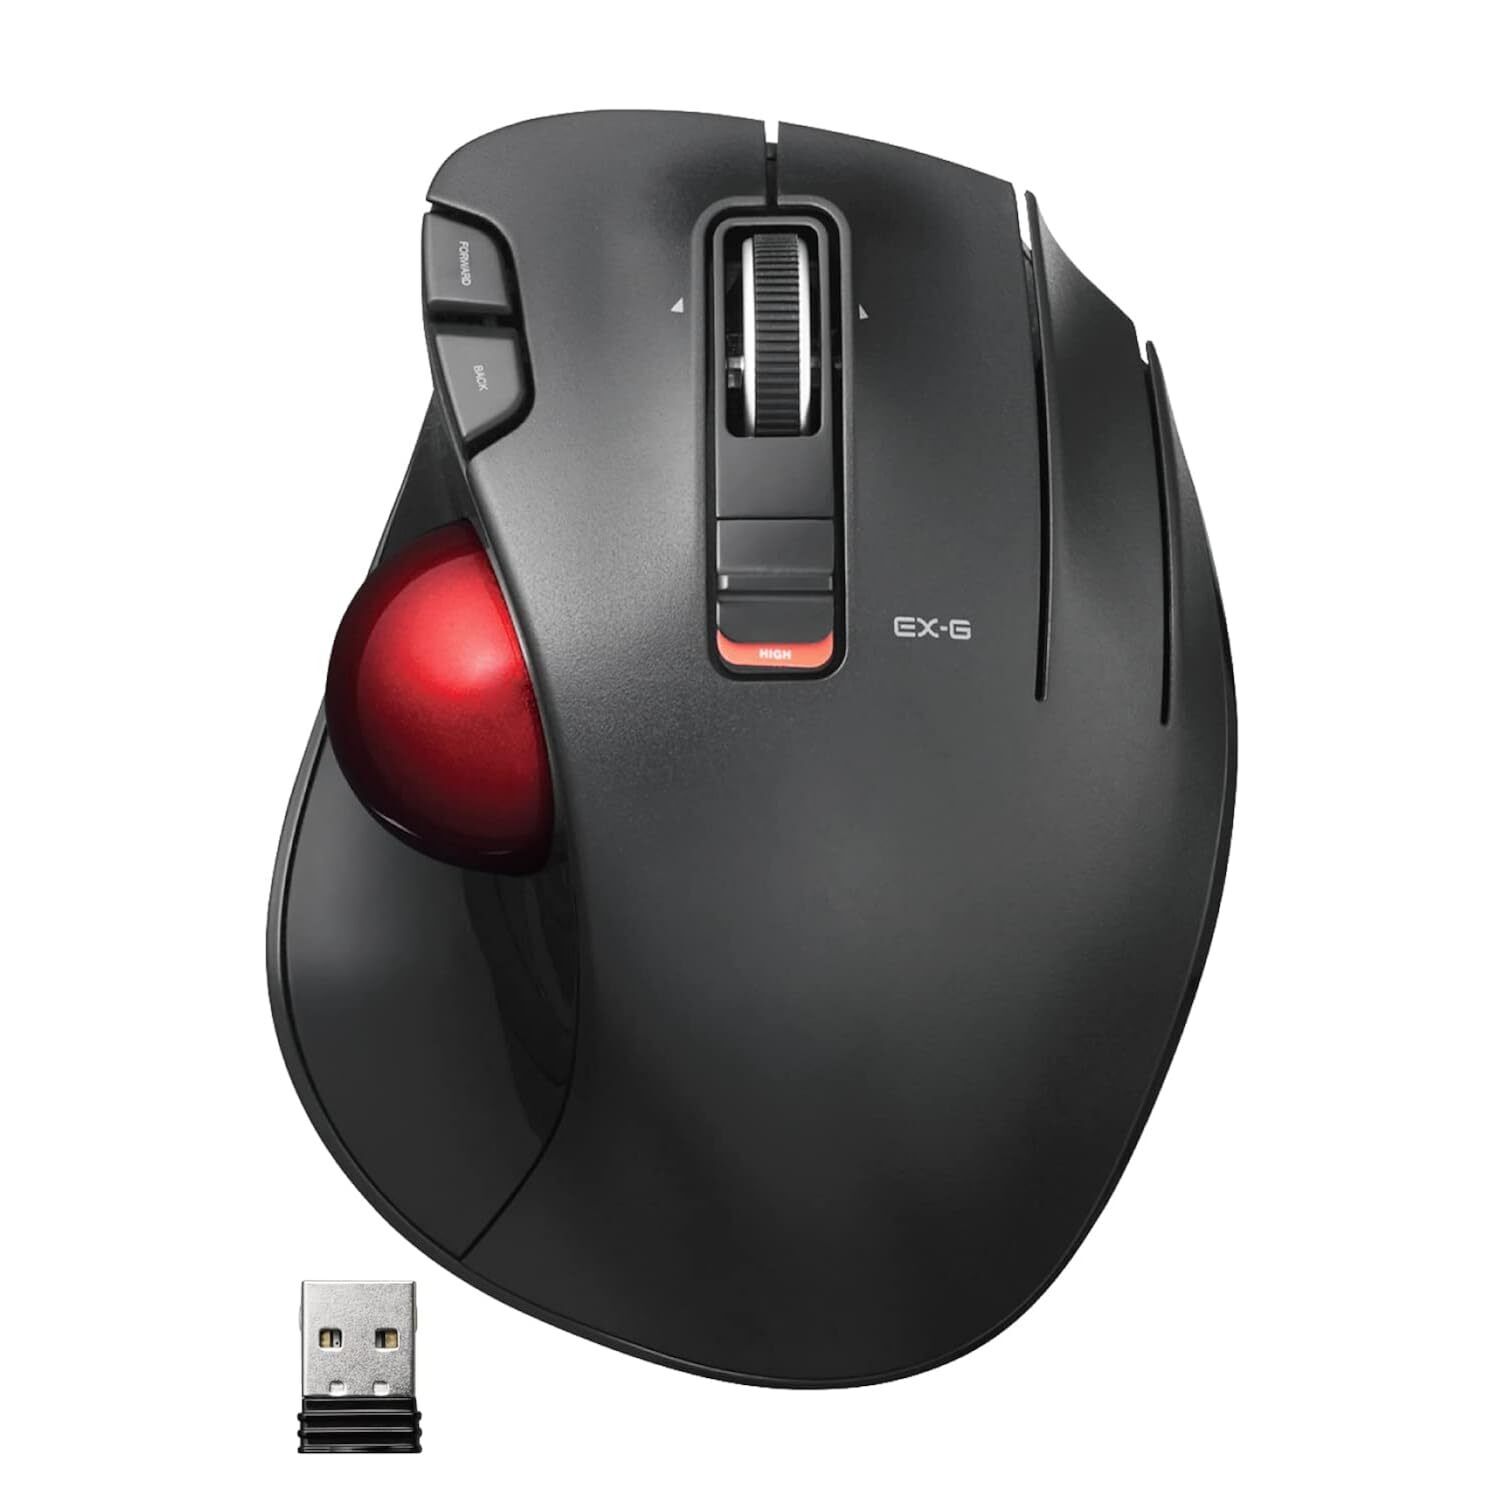 ELECOM EX-G Trackball Mouse, 2.4GHz Wireless, Thumb Control, 6-Button Function